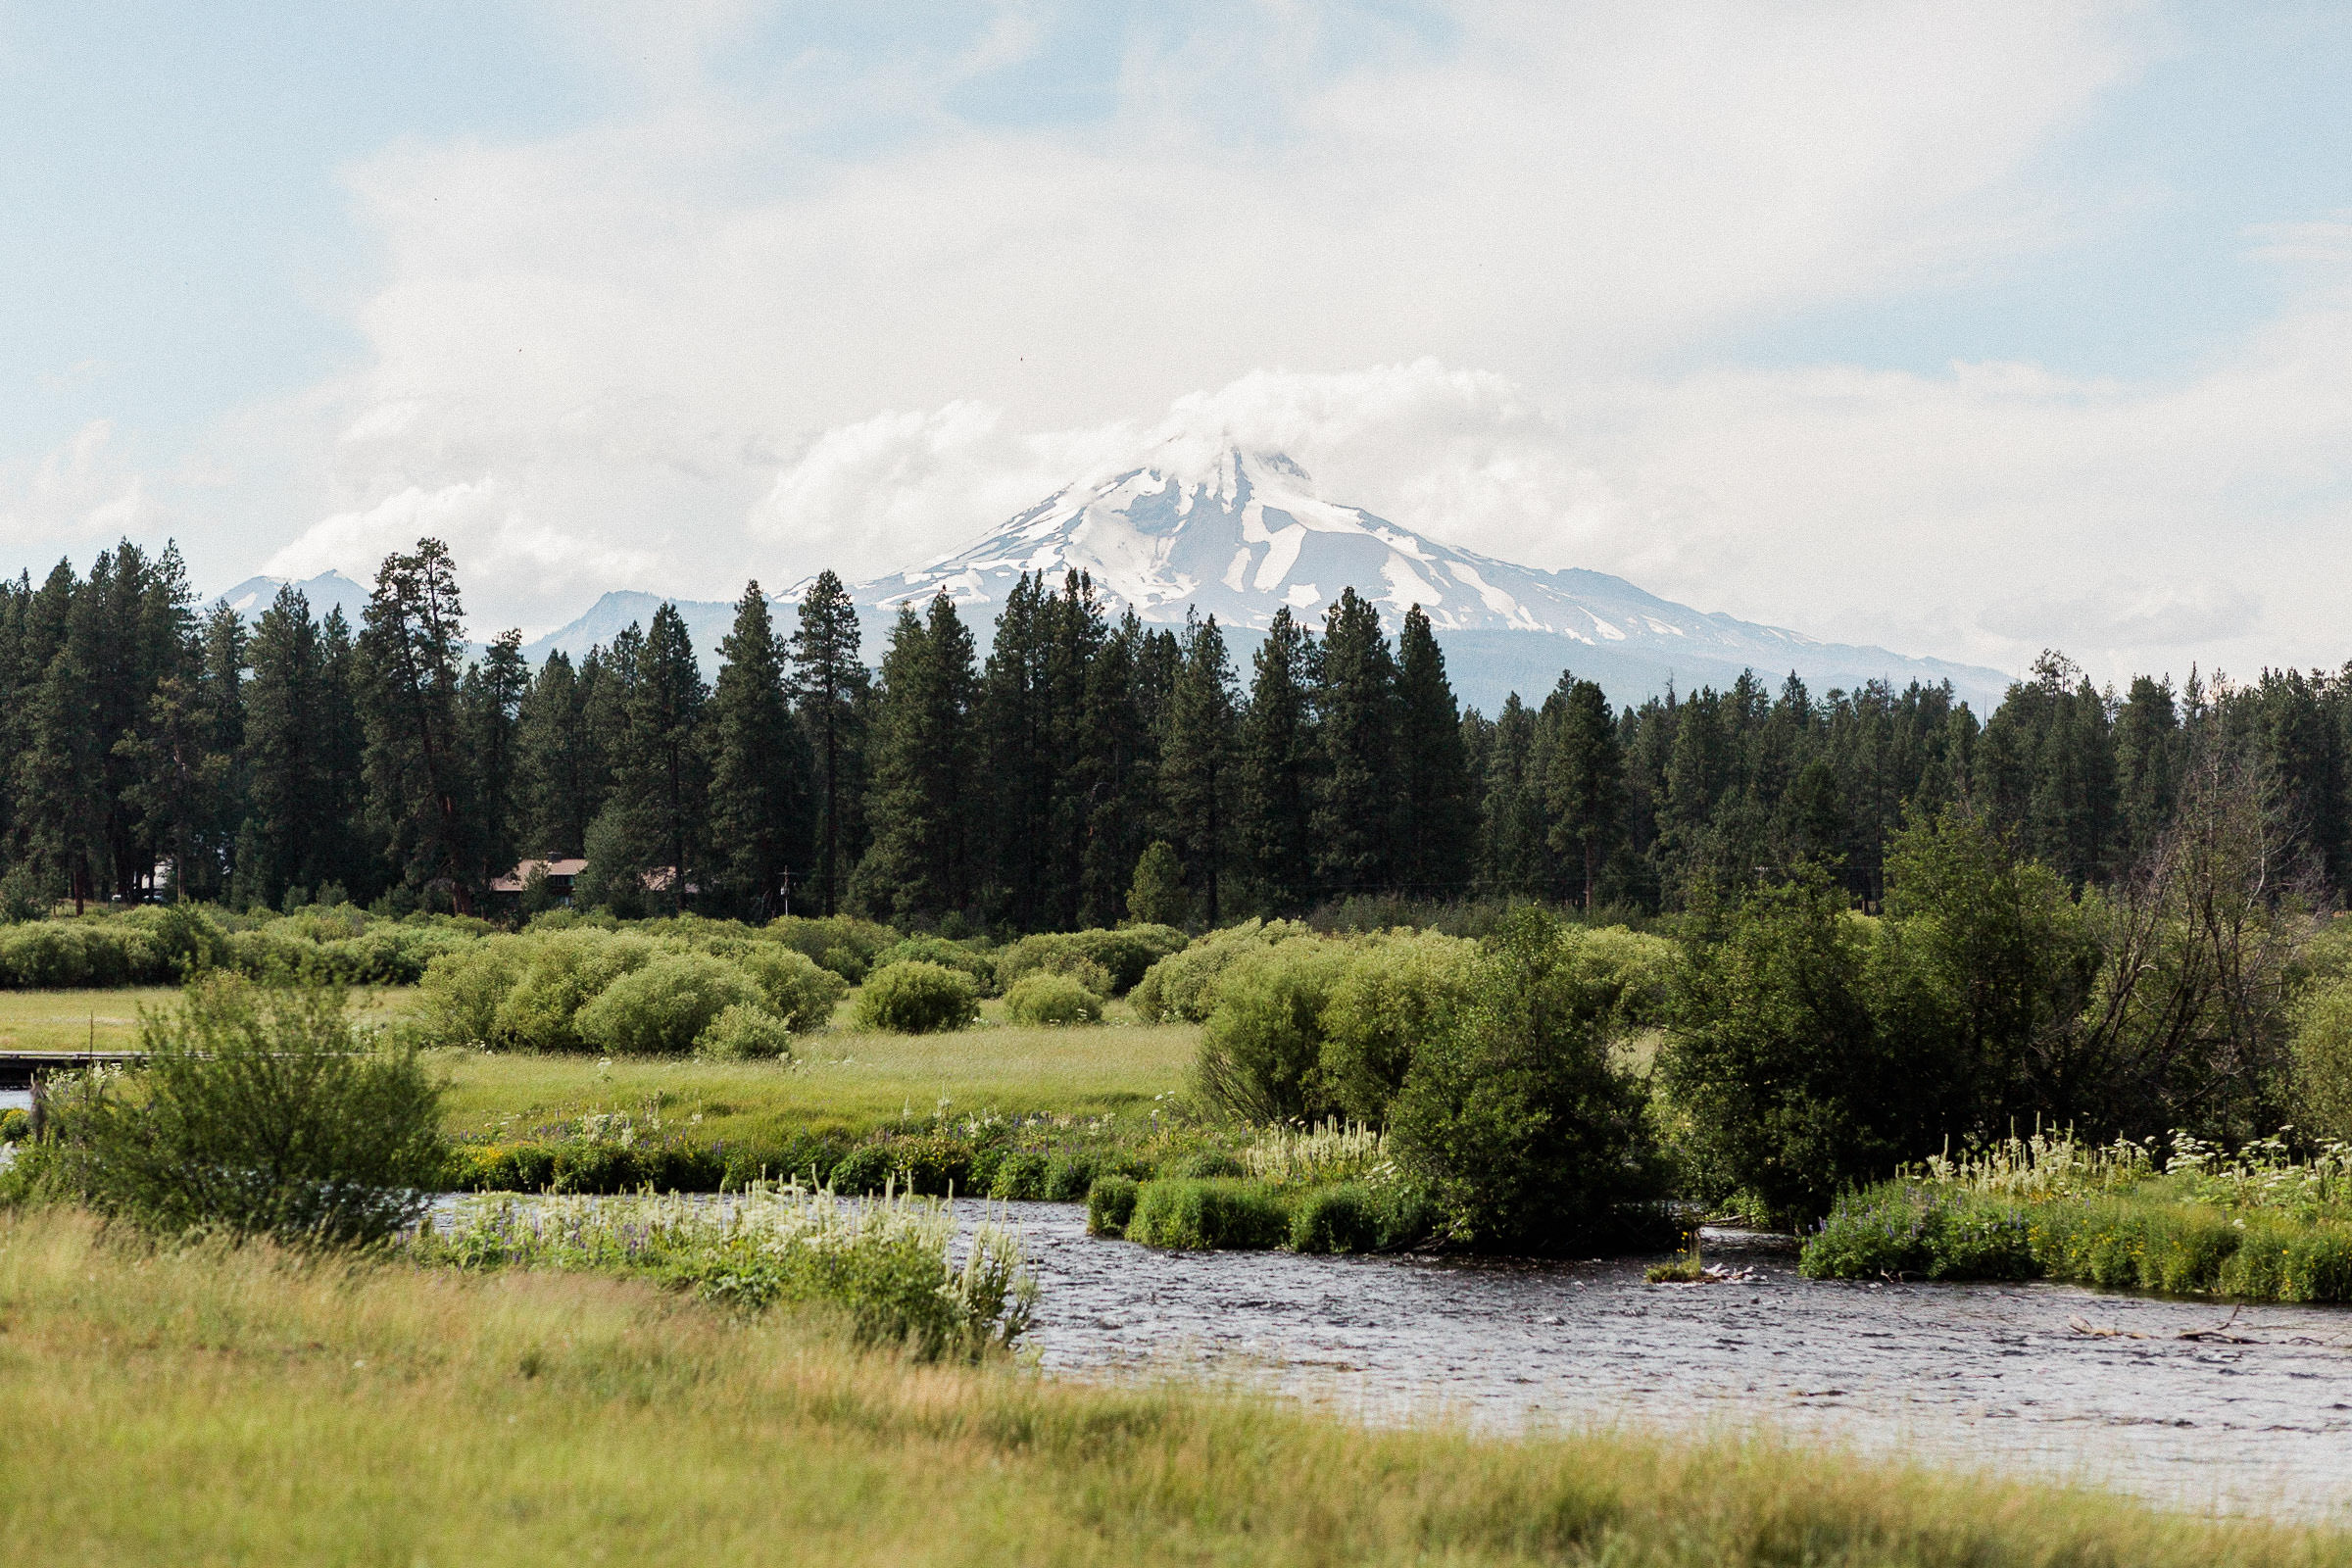 A view of the Metolius River running through a field with Mt. Jefferson towering in the distance